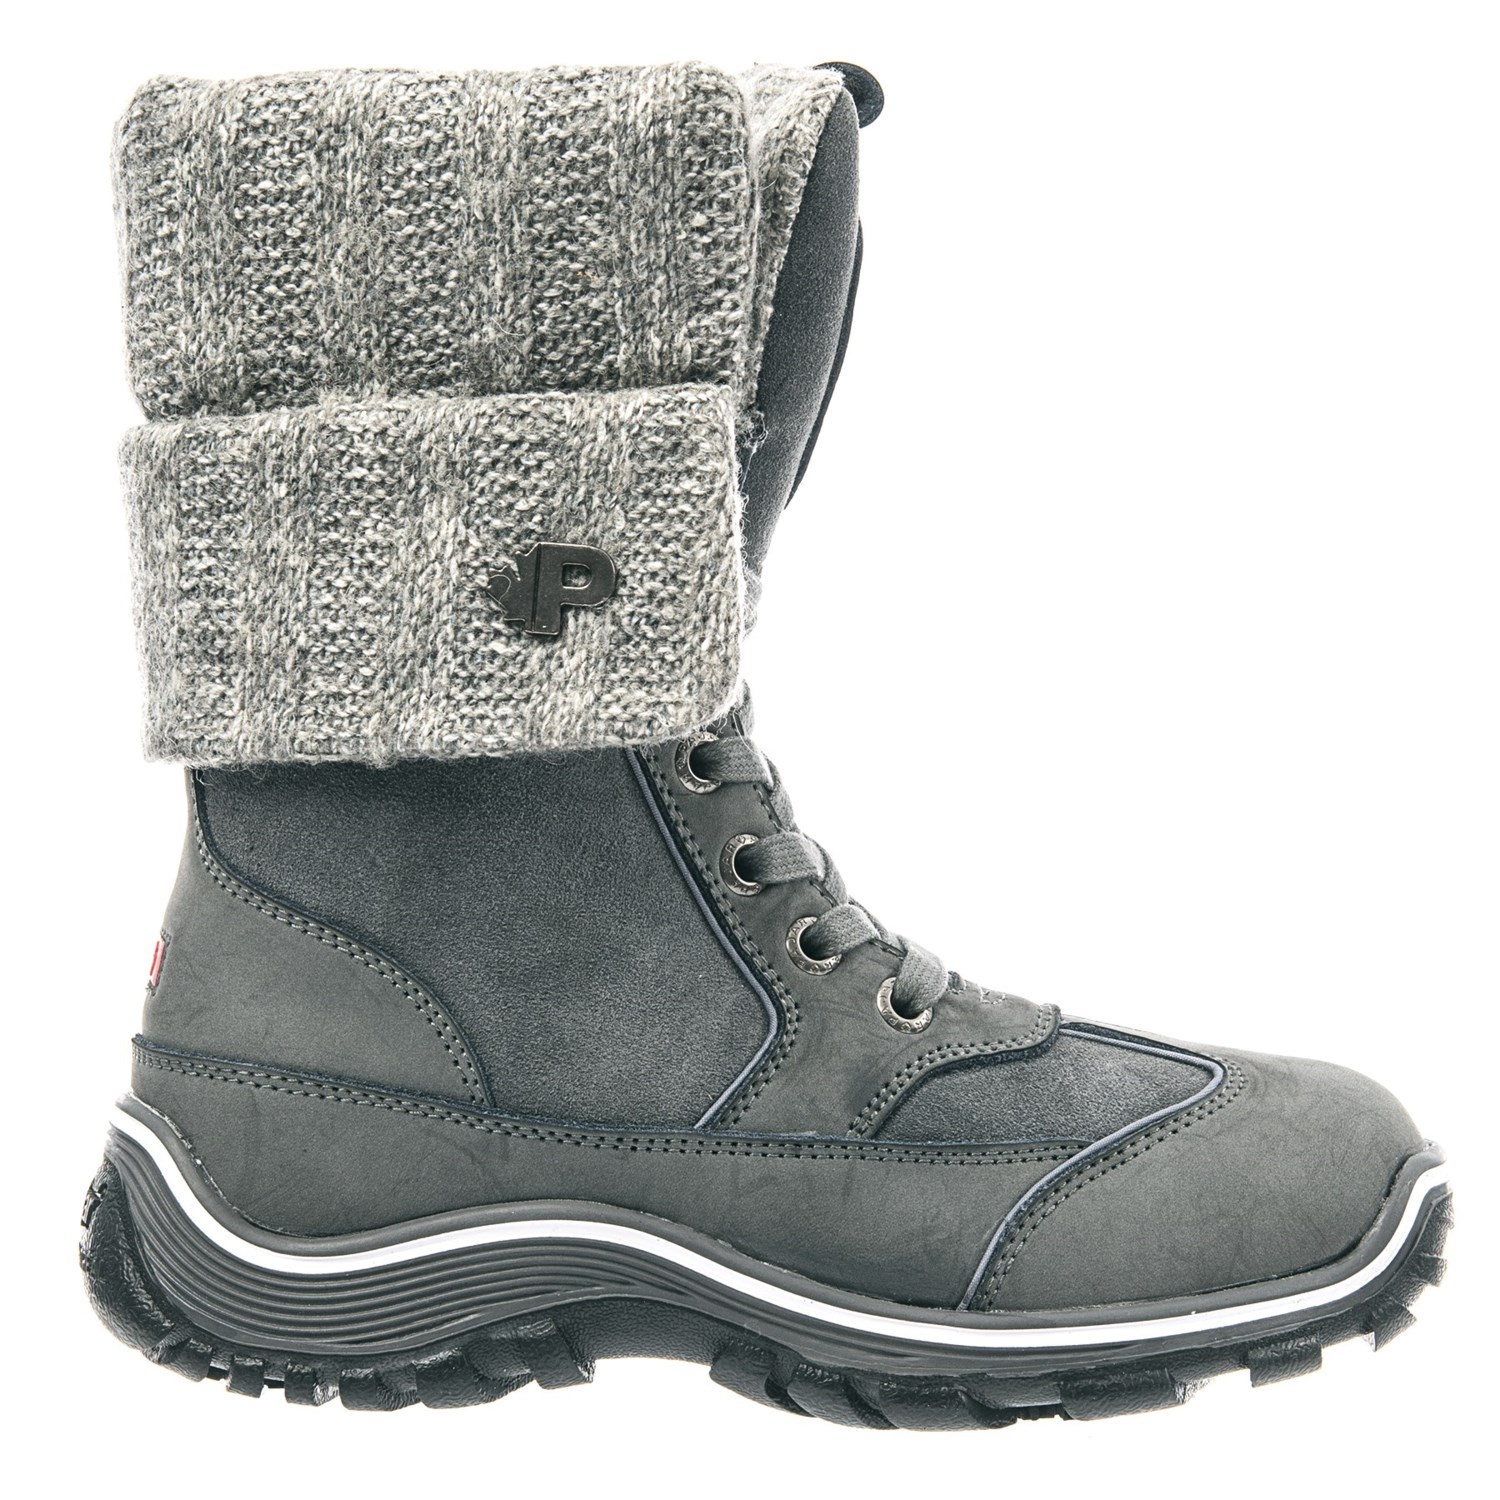 pajar waterproof insulated boots